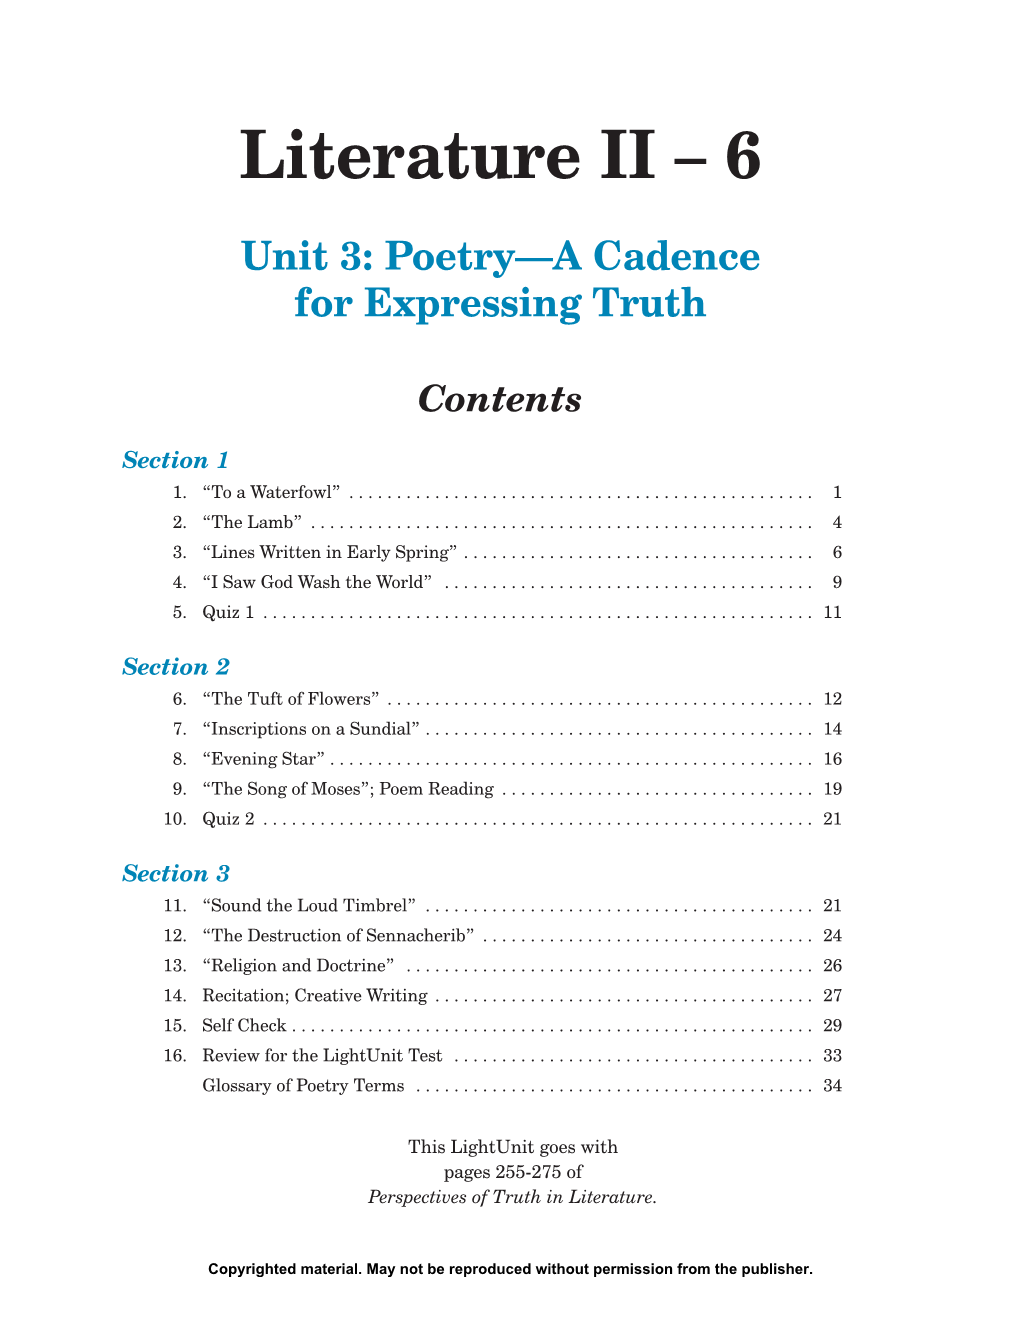 Literature II –6 Unit 3: Poetry—A Cadence for Expressing Truth